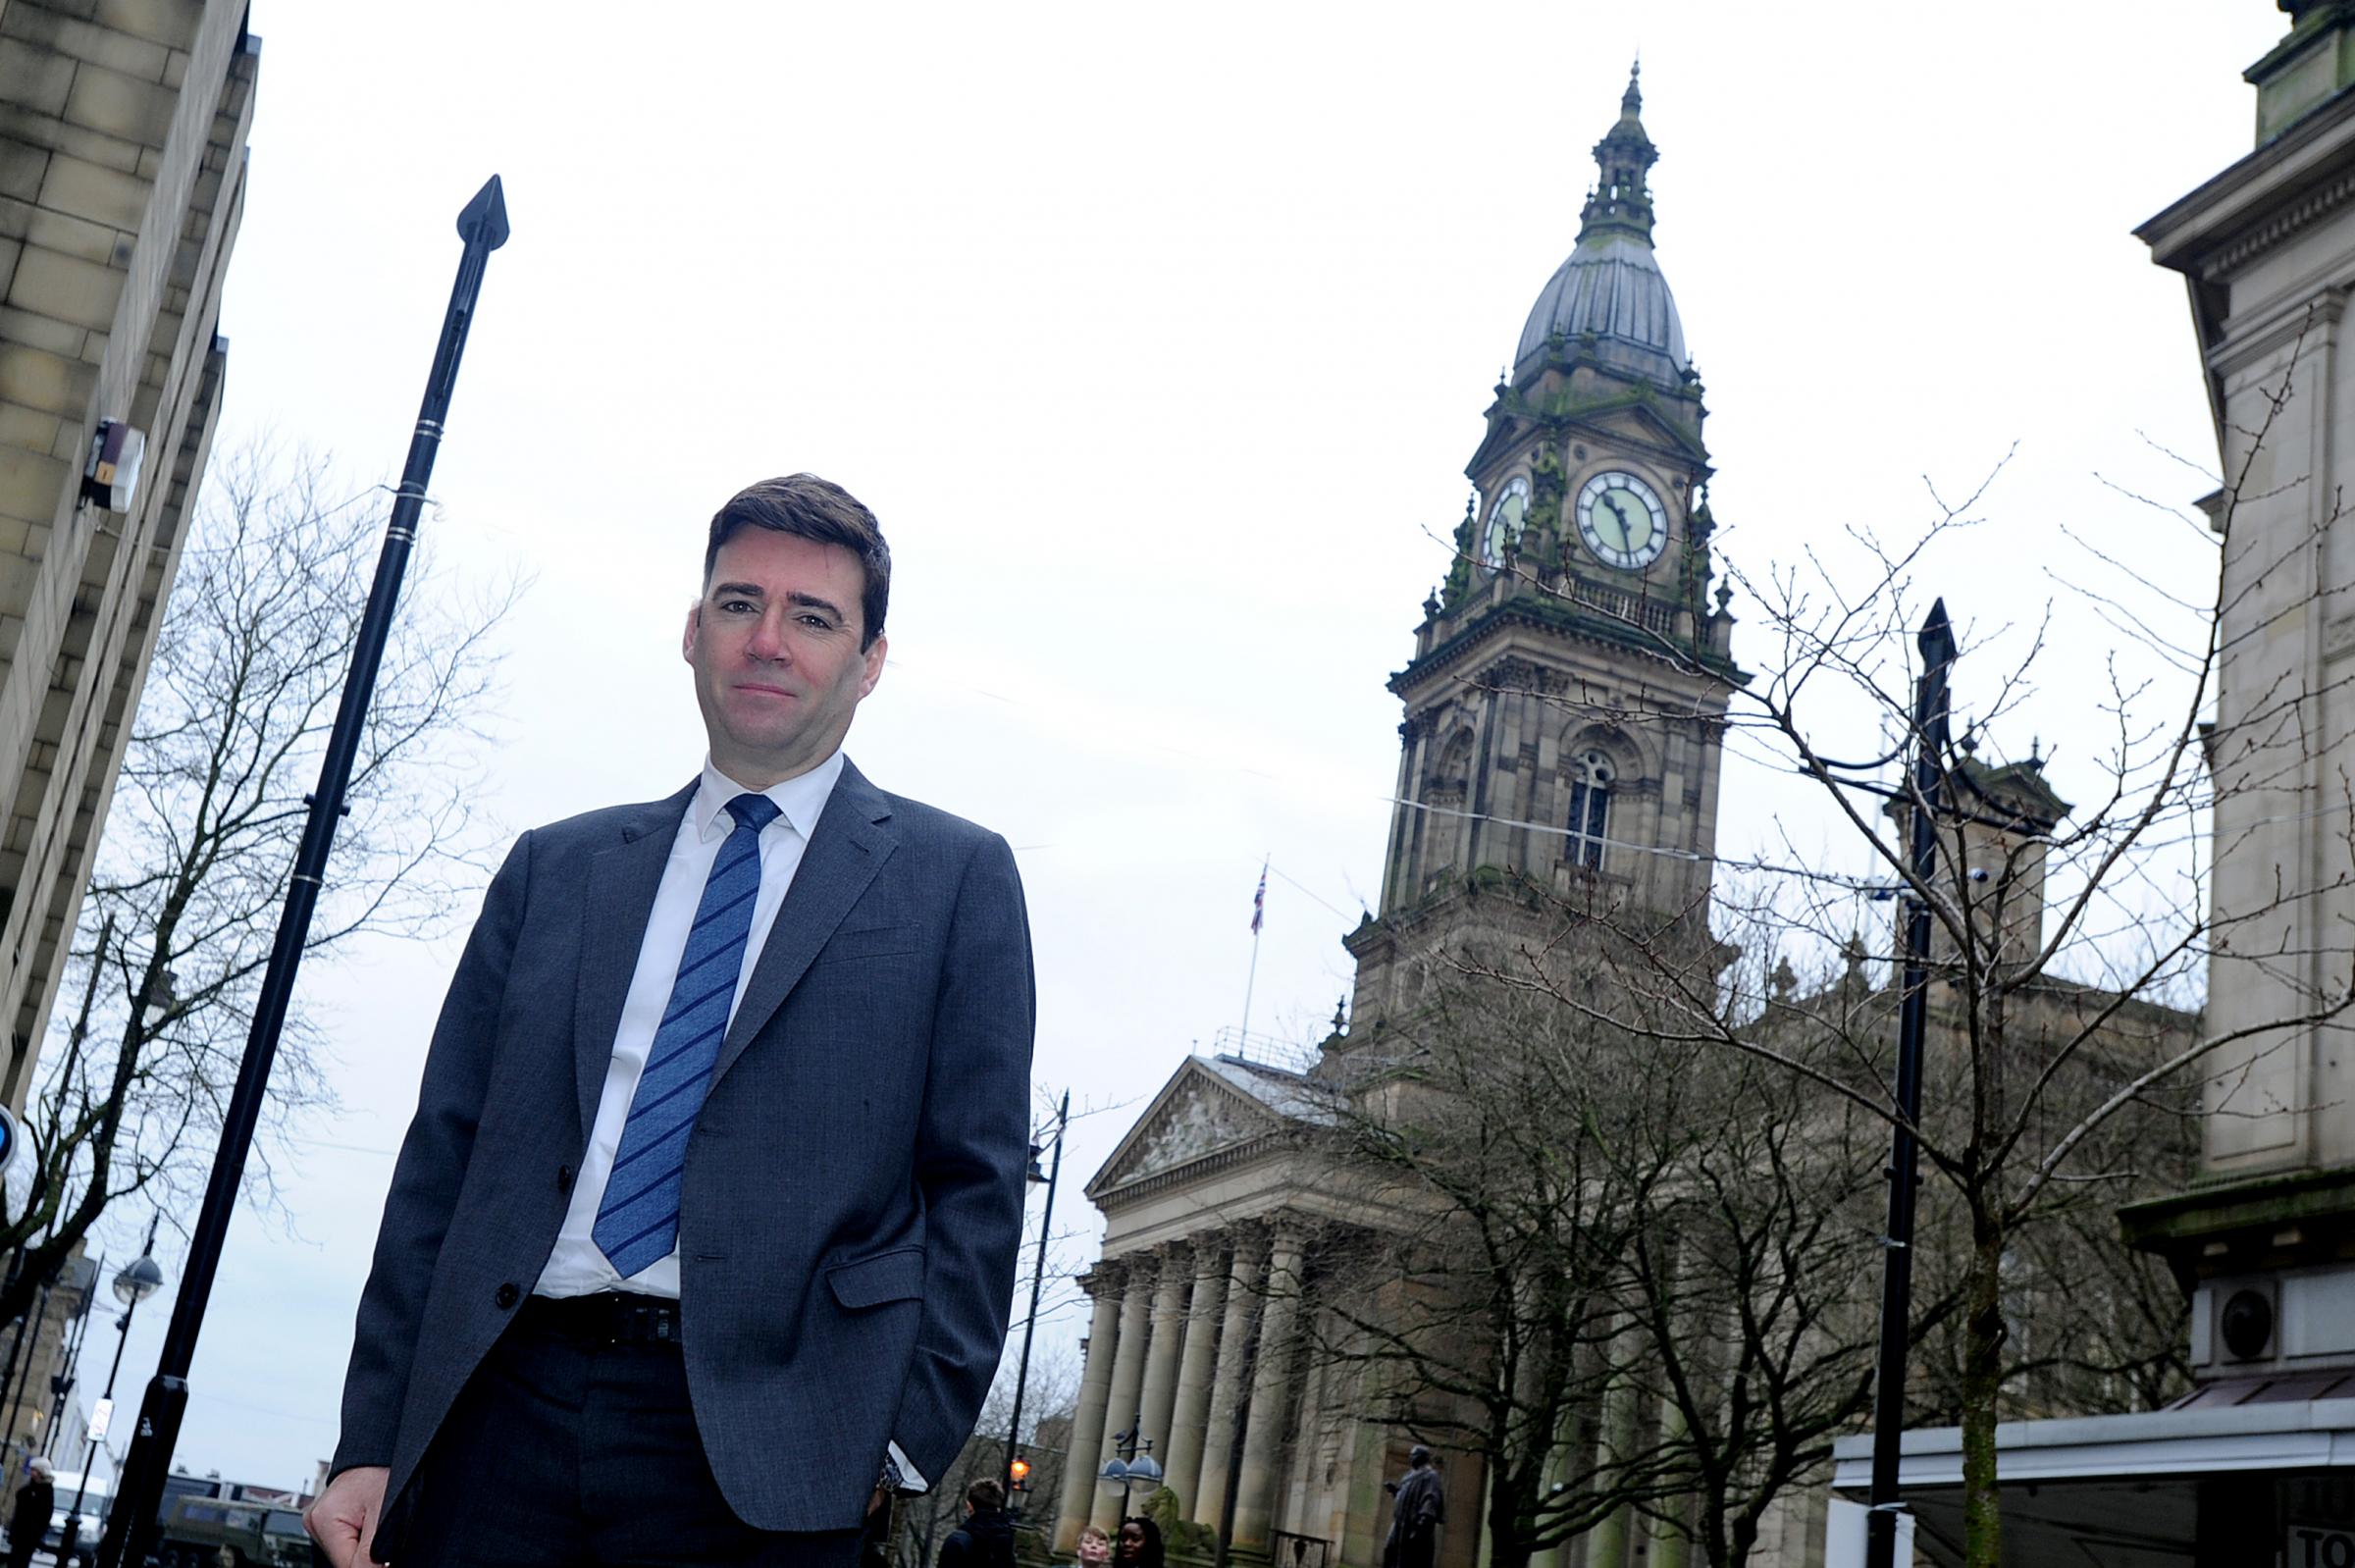 Mayoral hopeful wants to end rough sleeping - The Bolton News